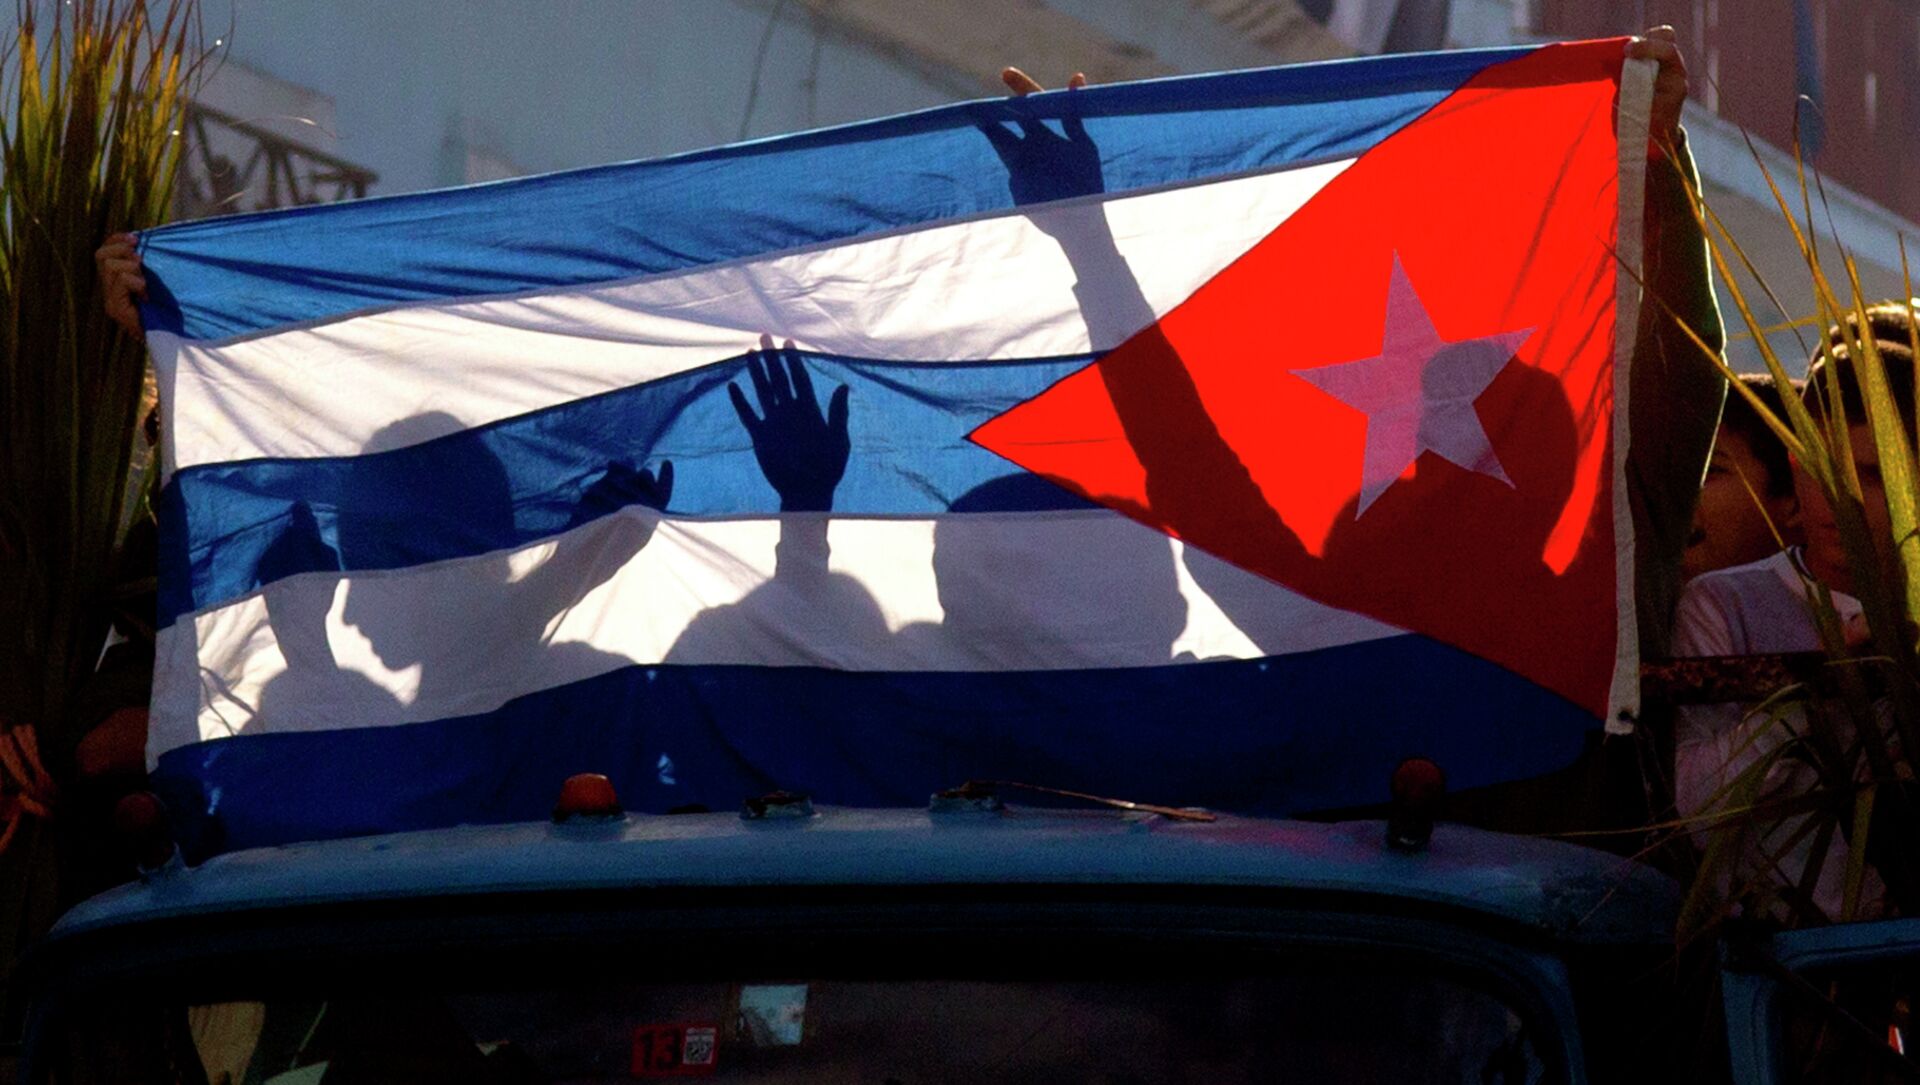 Children's shadows are cast on a Cuban national flag as they take part in a caravan tribute marking the 56th anniversary of the original street party that greeted a triumphant Castro and his rebel army, in Regla, Cuba, Thursday, Jan. 8, 2015 - Sputnik Afrique, 1920, 11.03.2021